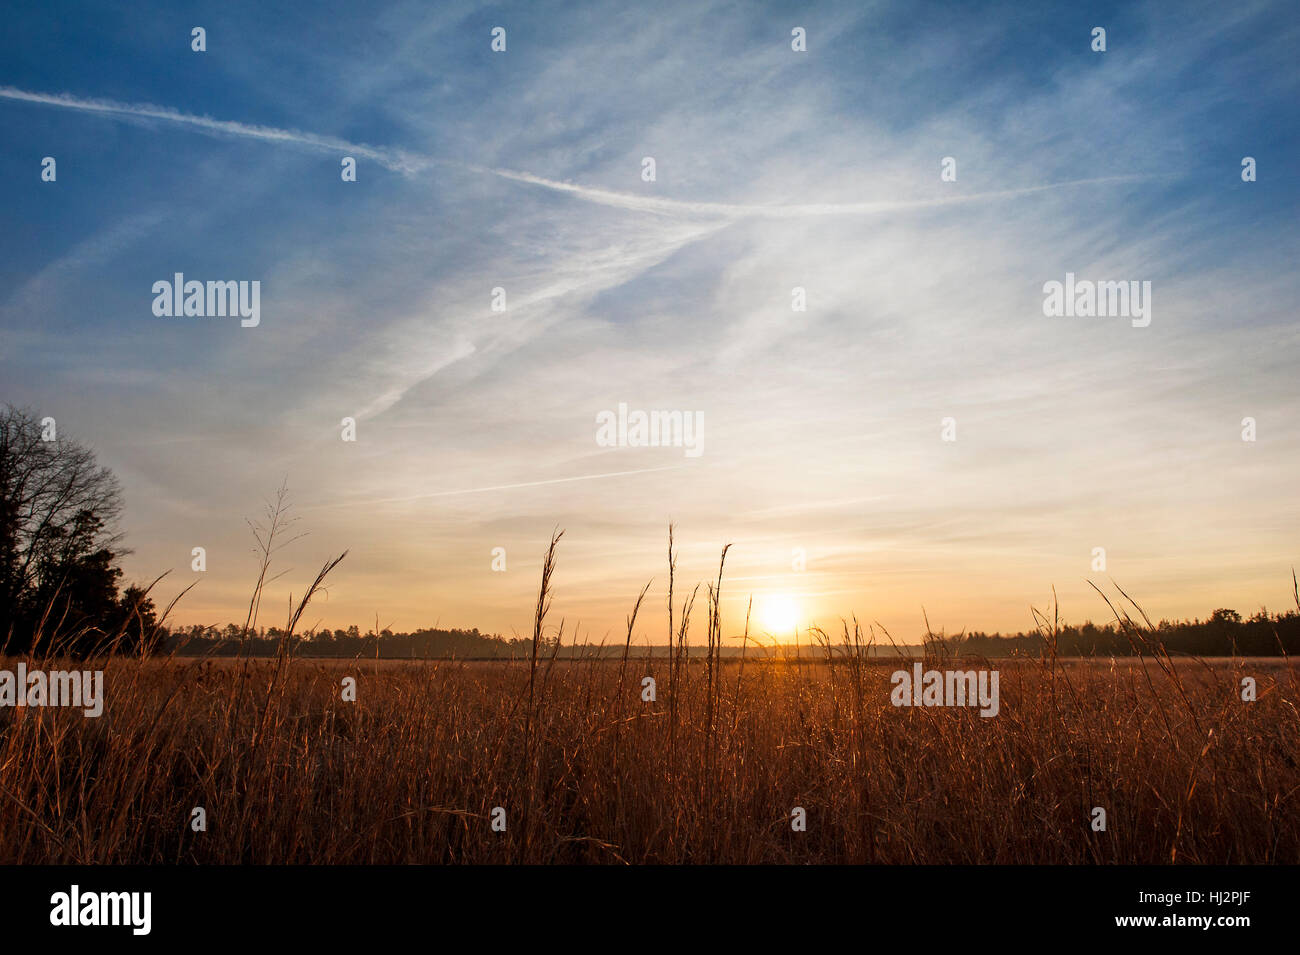 A somewhat cloudy sunrise in a field of tall grasses. Stock Photo